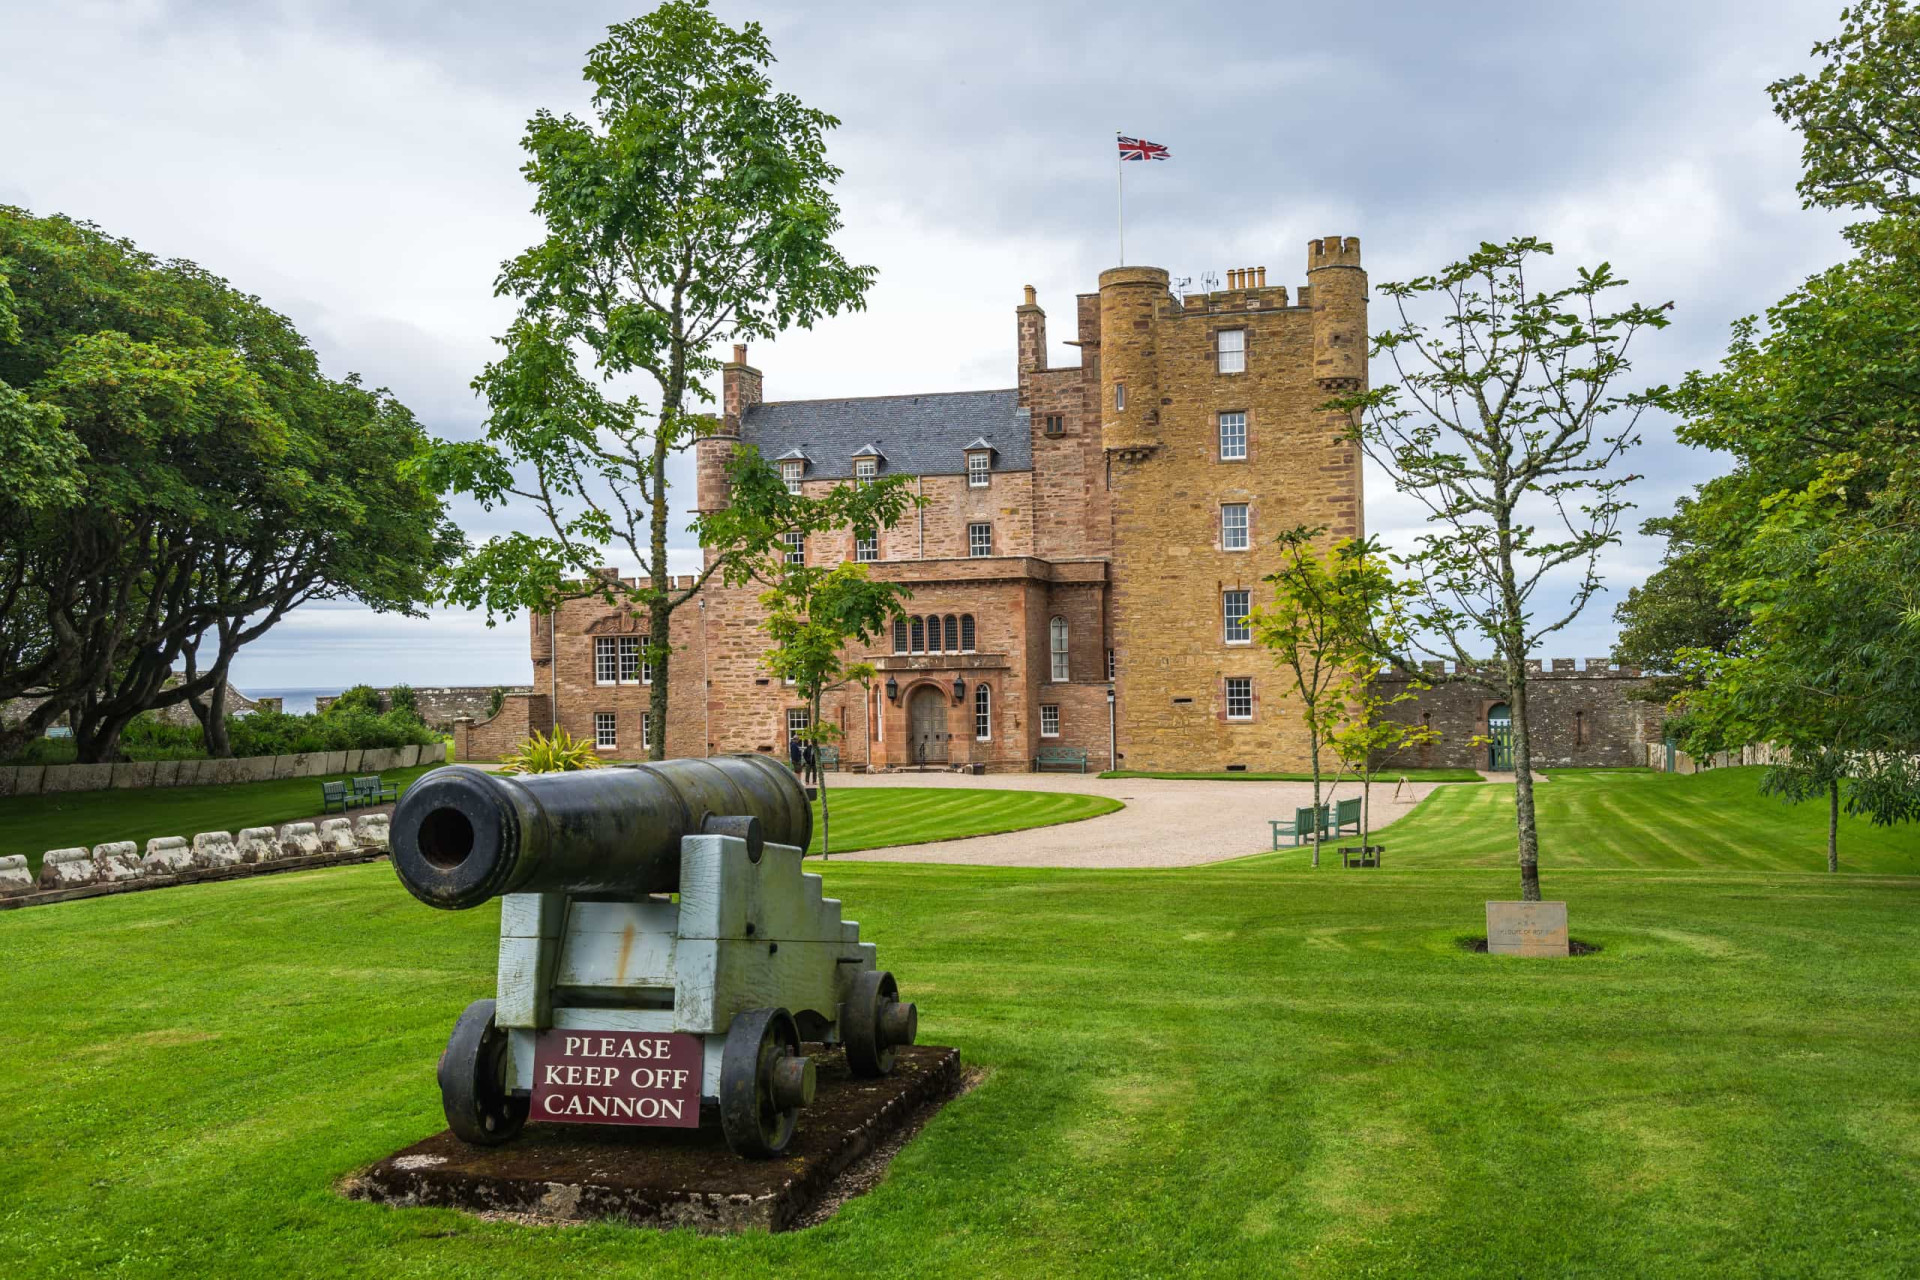 <p>The Castle of Mey, in Caithness, was the preferred holiday home of Queen Elizabeth, the Queen Mother, but who knows whether she caught sight or sound of its ghostly inhabitant?</p><p>You may also like:<a href="https://www.starsinsider.com/n/376581?utm_source=msn.com&utm_medium=display&utm_campaign=referral_description&utm_content=479726v1en-ca"> Gwen Stefani and other celebs accused of cultural appropriation</a></p>